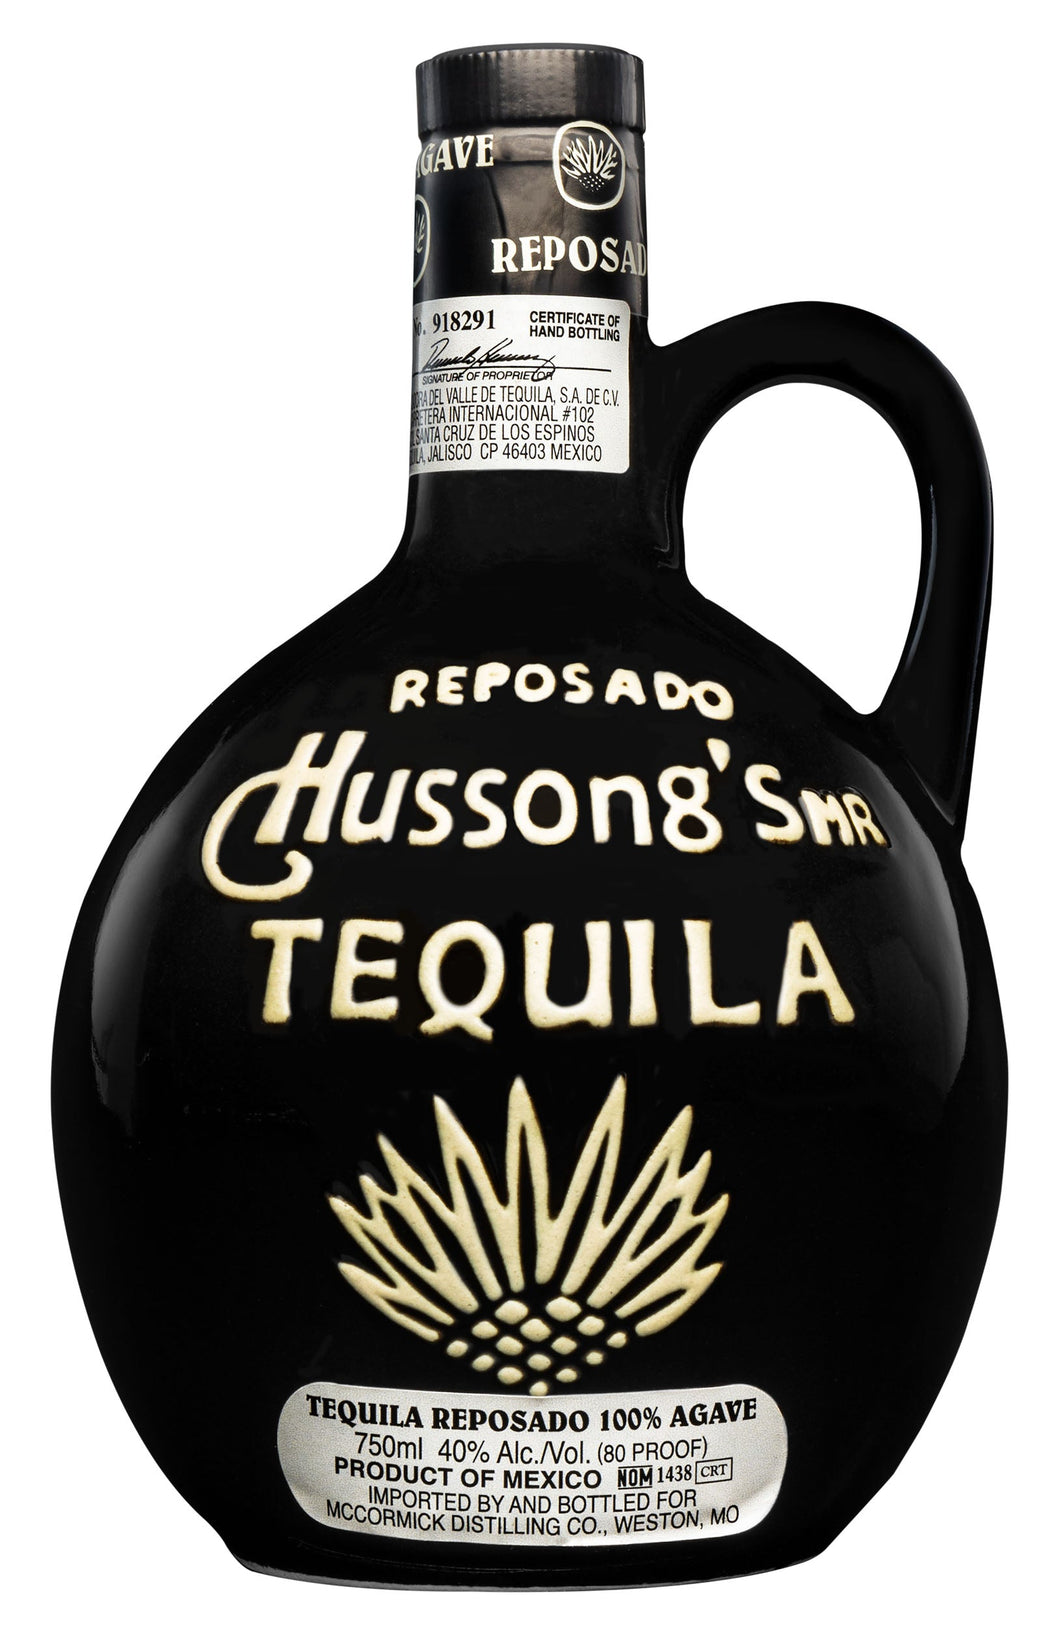 Hussong's Tequila Reposado